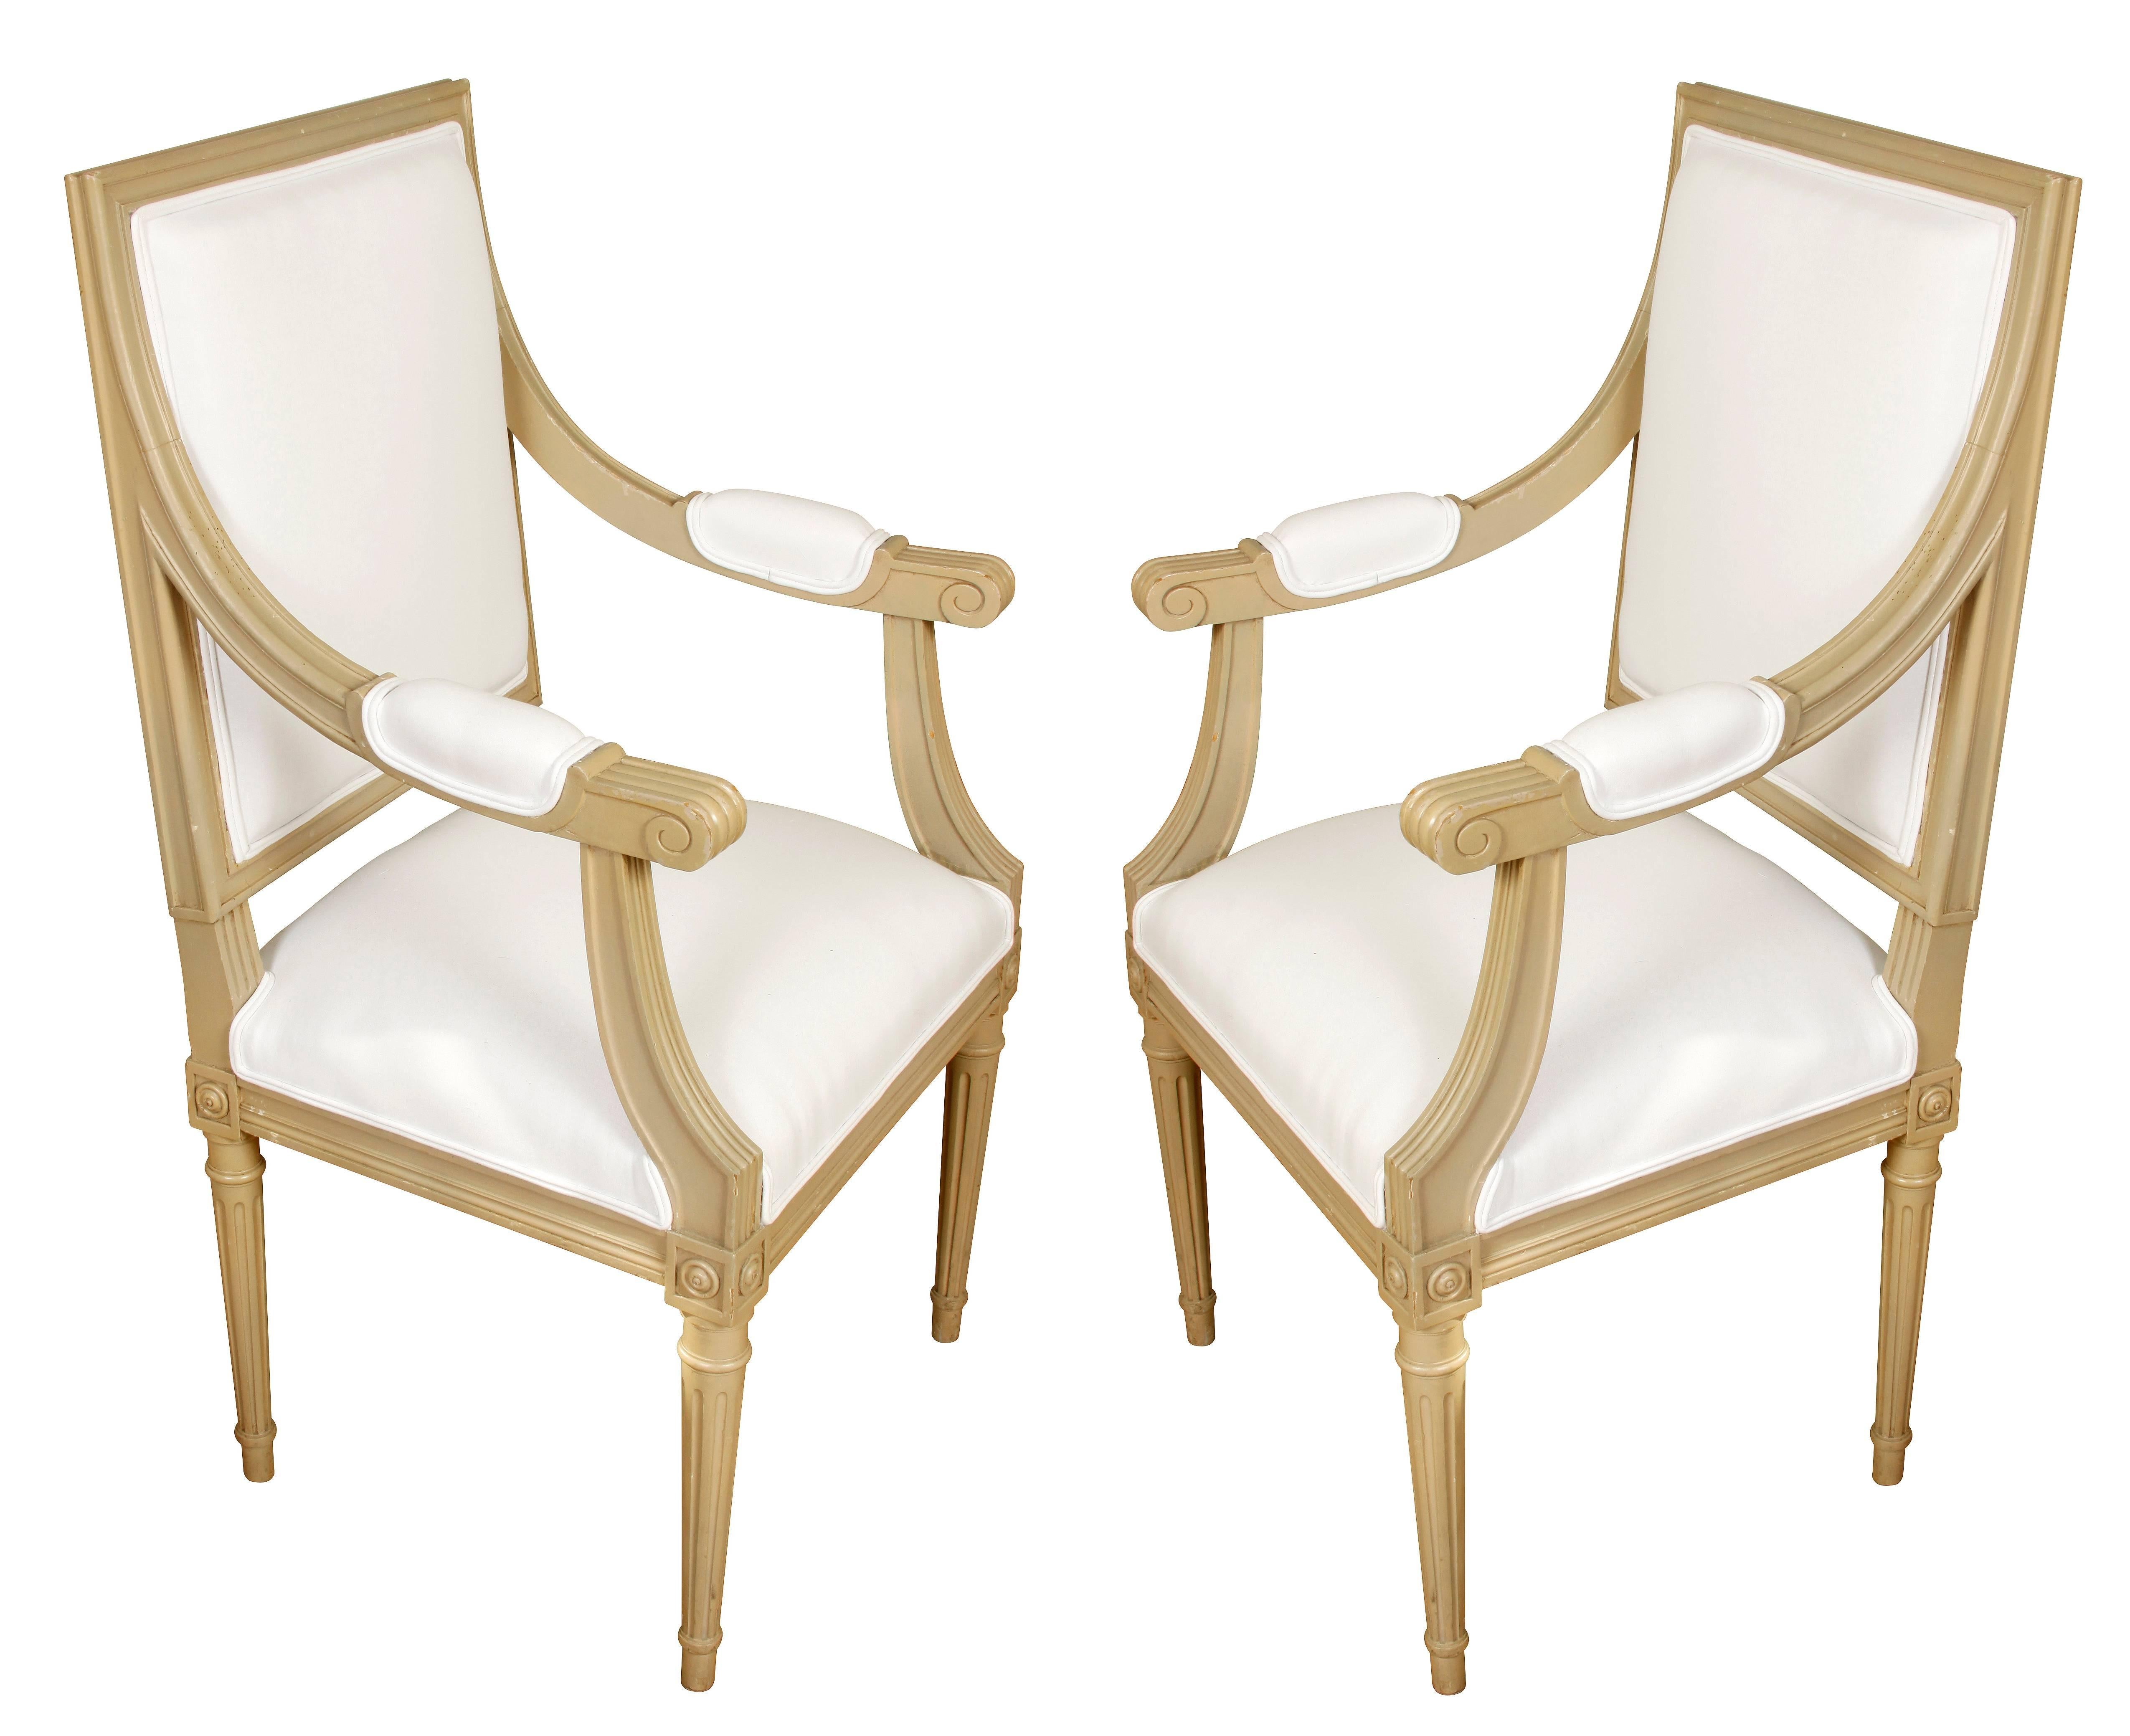 A Set of Ten Louis XVI Style Dining Chairs with a painted finish, including two arm chairs and eight side chairs.  The clean lines of this set, and the understated details give them versatility--they would work in contemporary or traditional